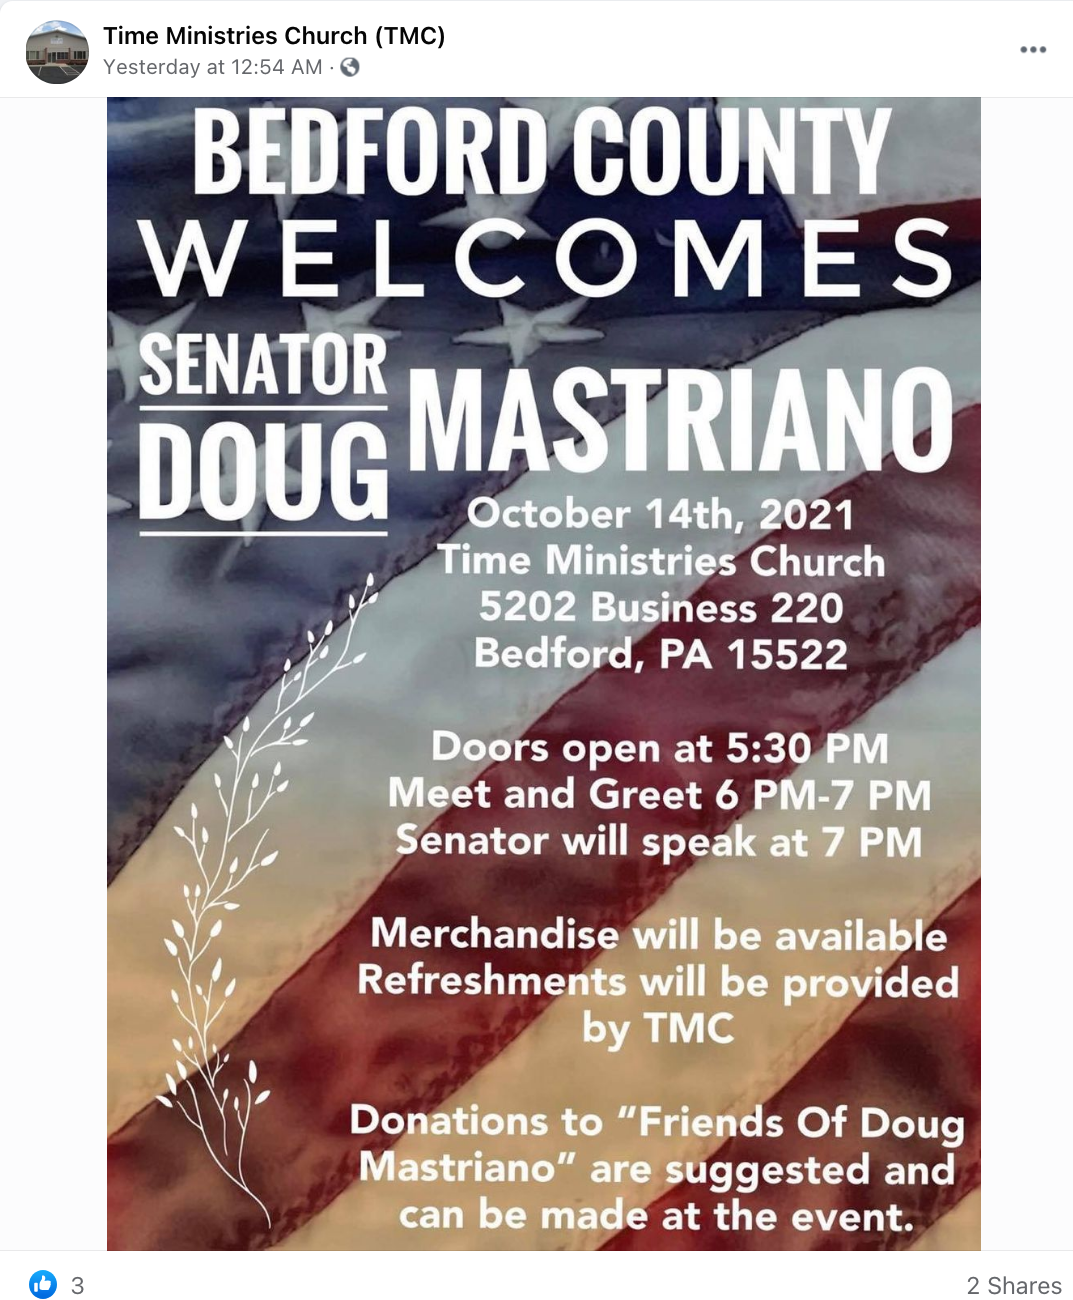 Flyer for event with Doug Mastriano.